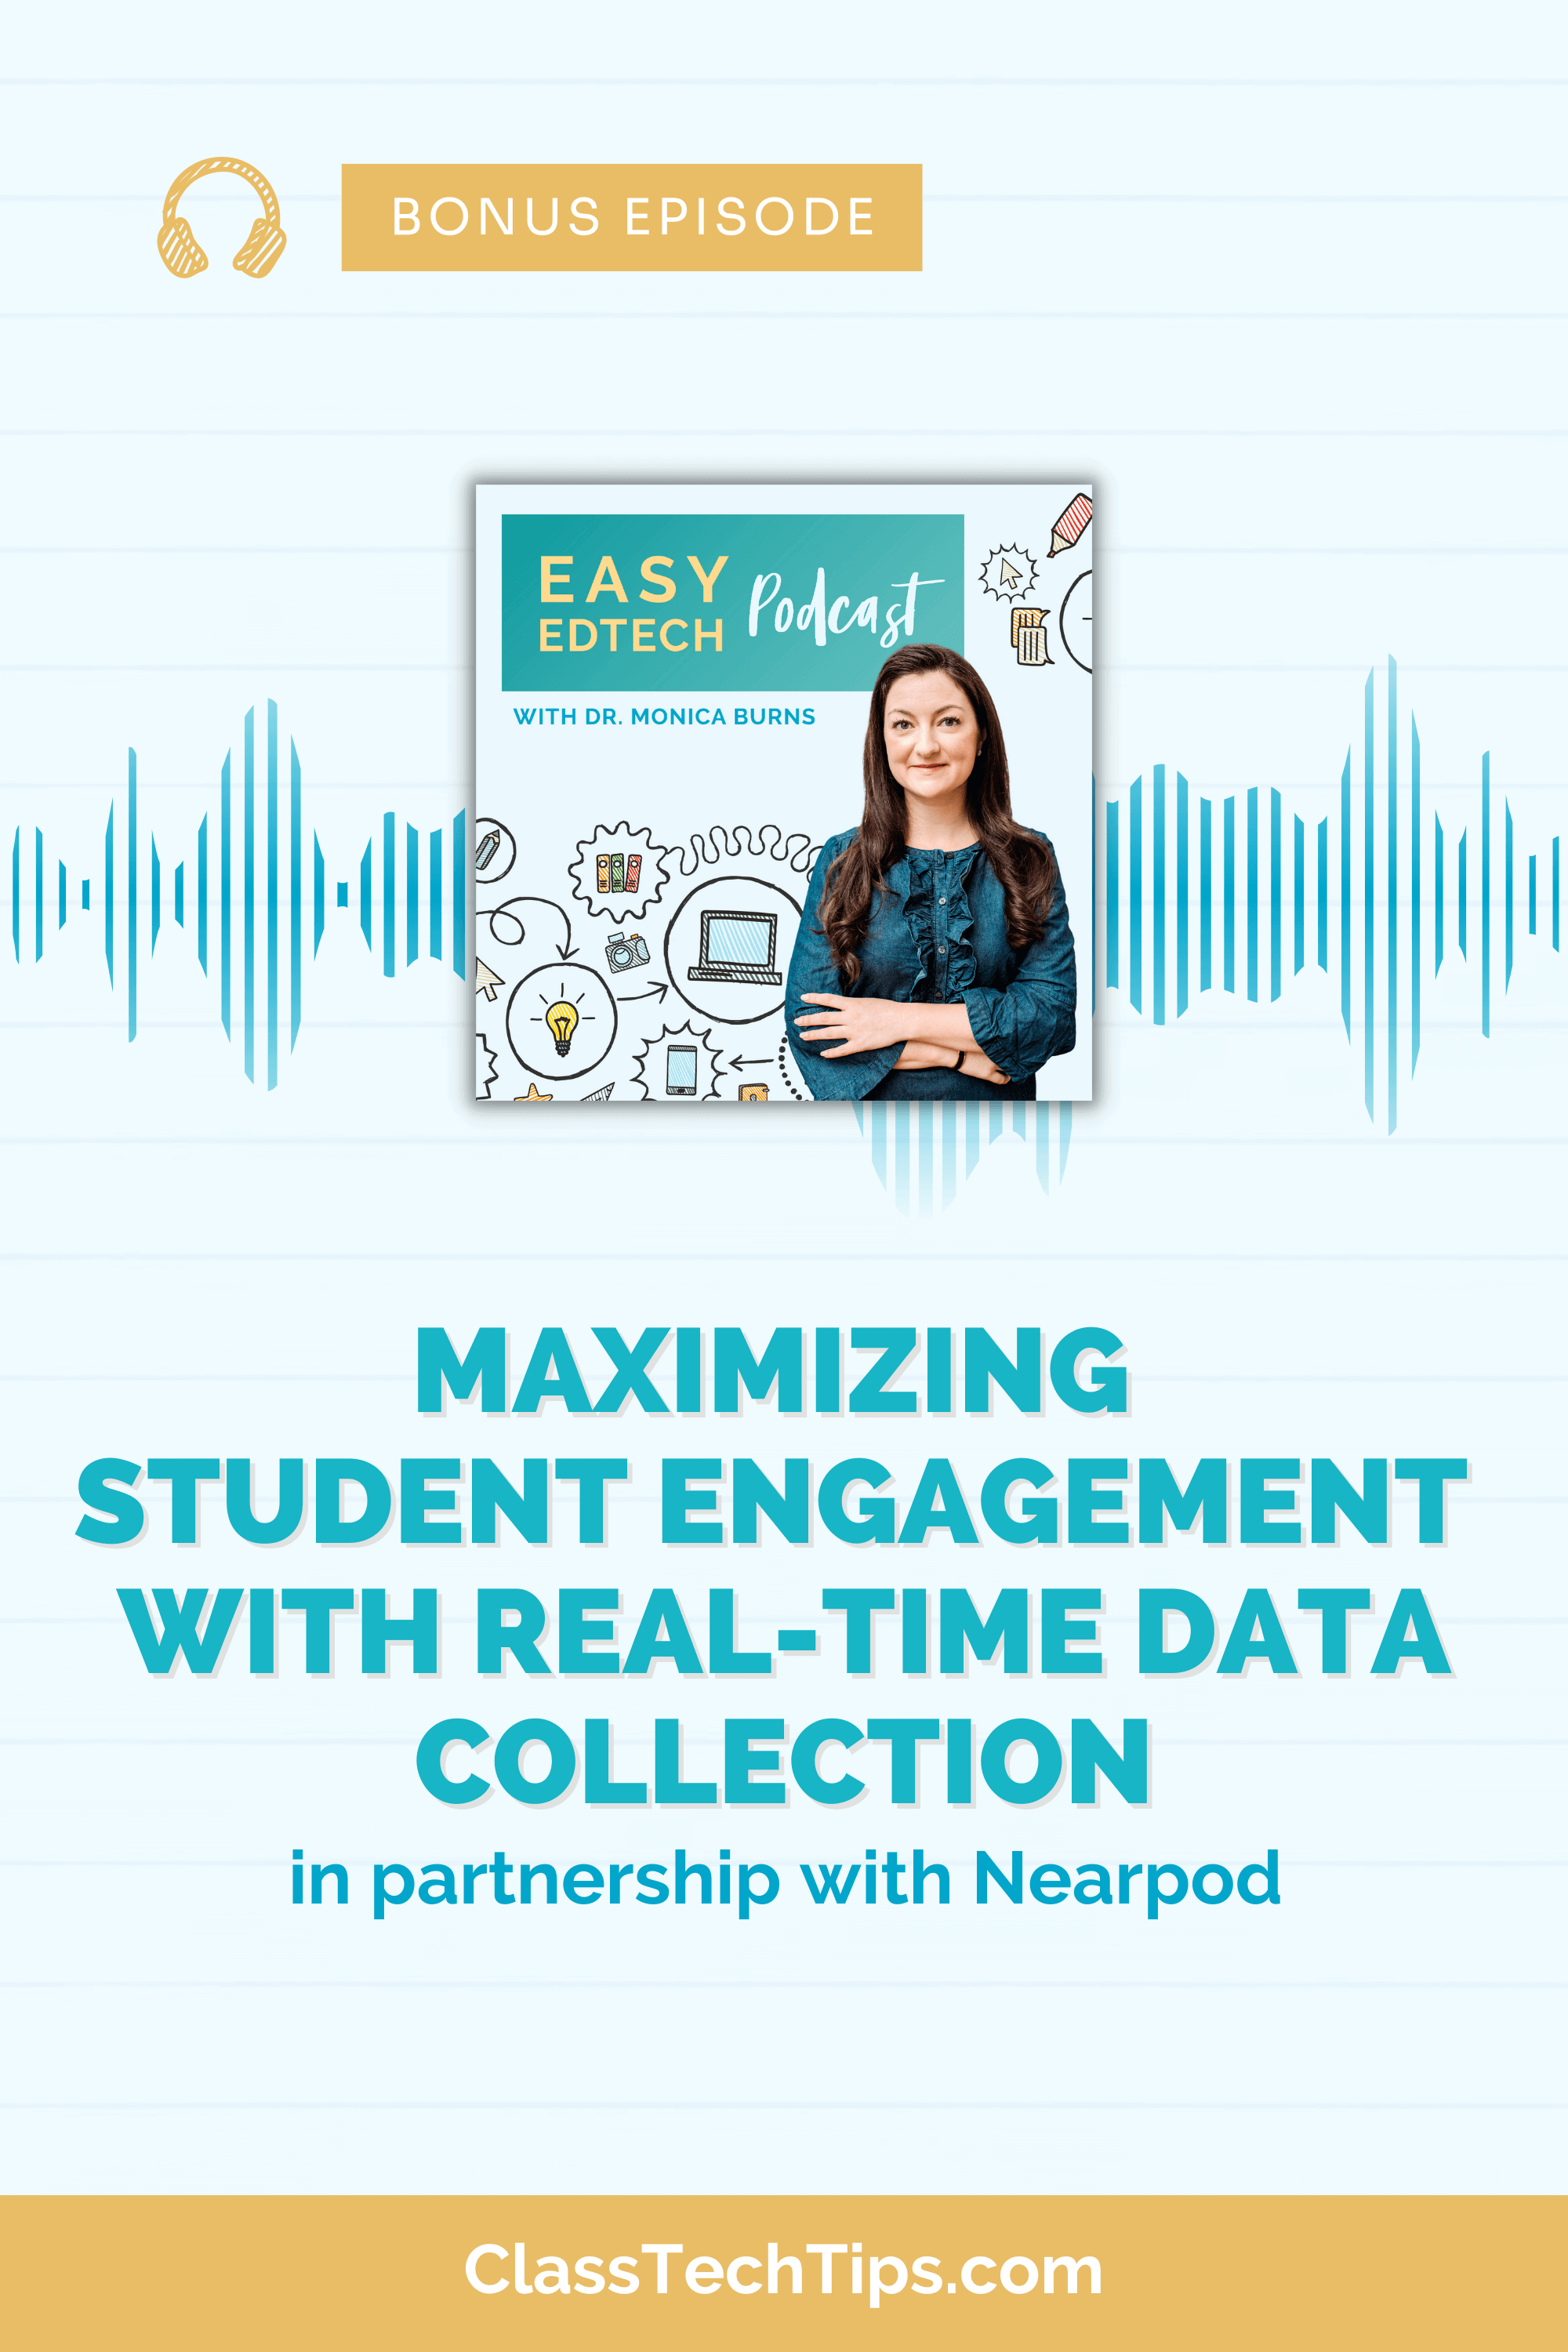 Podcast episode image featuring Todd Brekhus, focusing on maximizing student engagement and data collection through Nearpod and its integration with Renaissance tools.